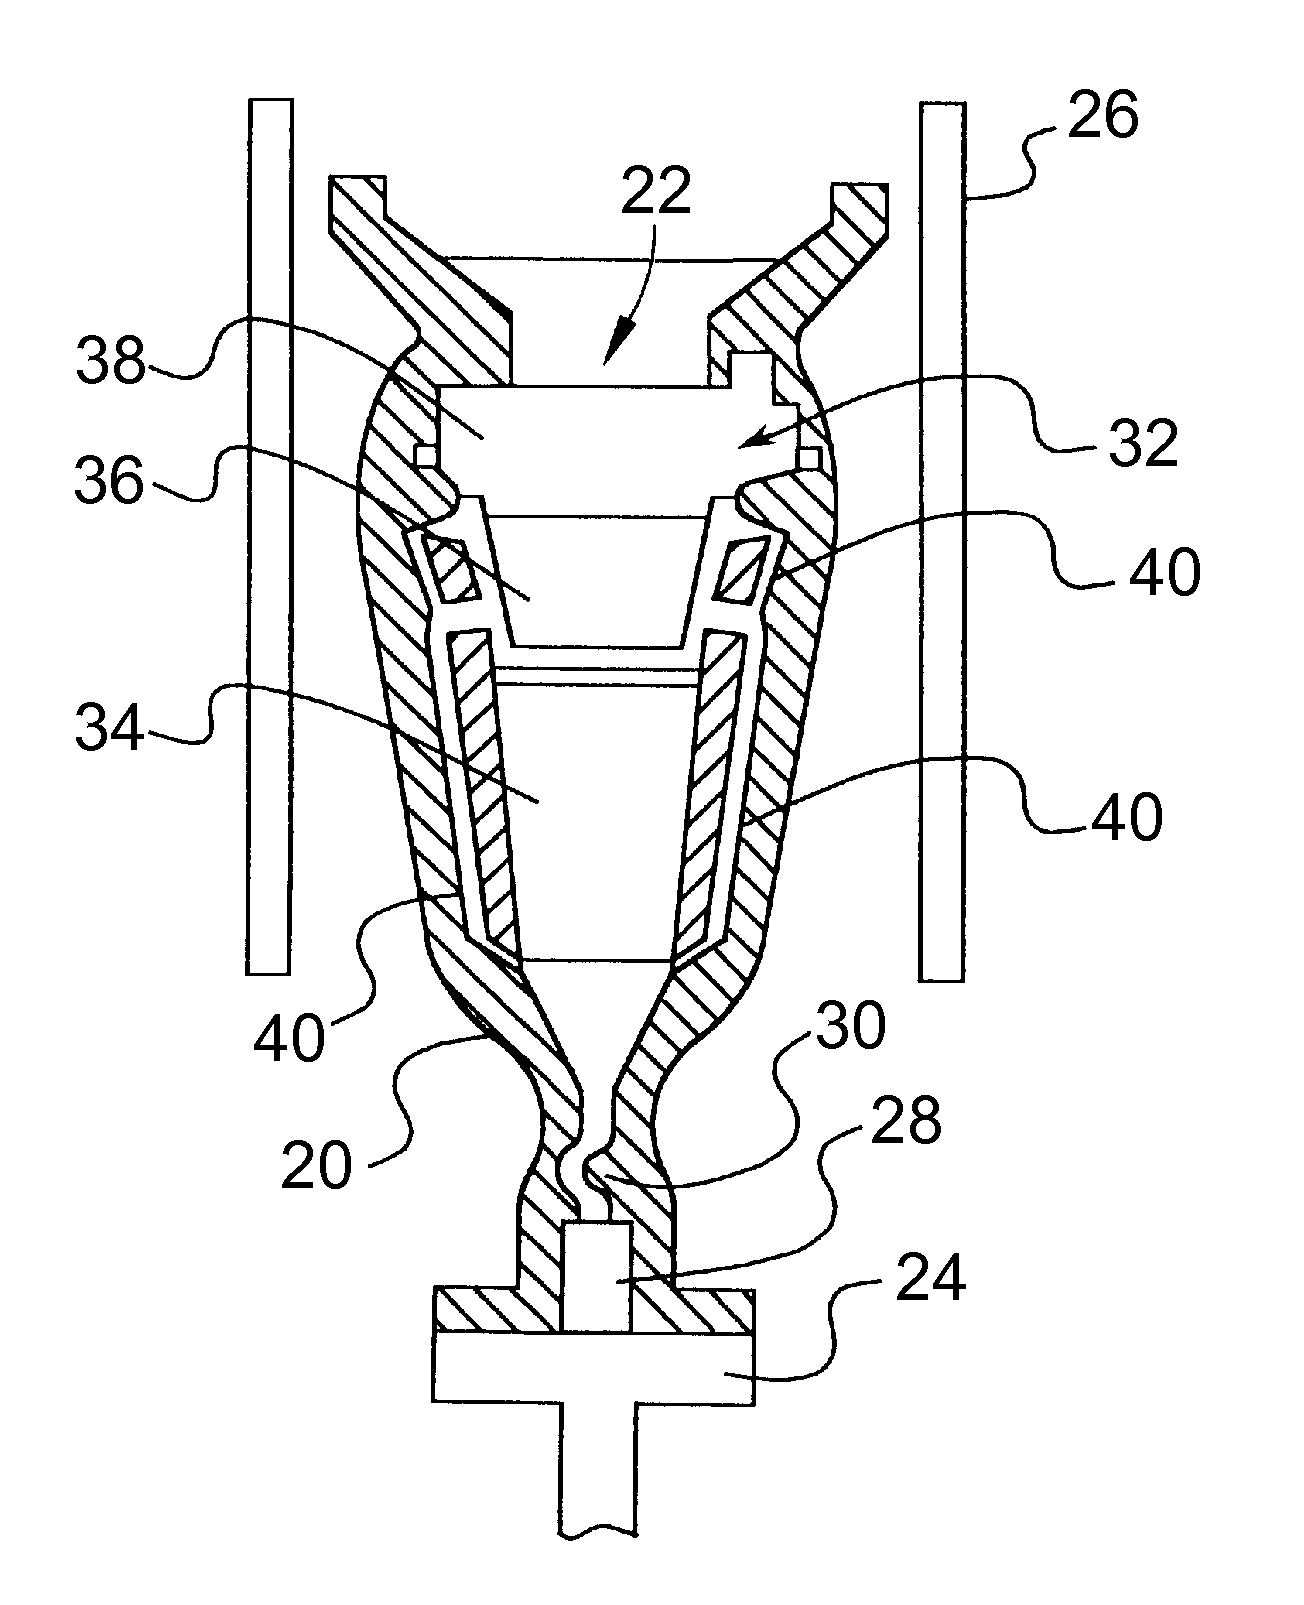 Nickel-base superalloy, unidirectional-solidification process therefor, and castings formed therefrom